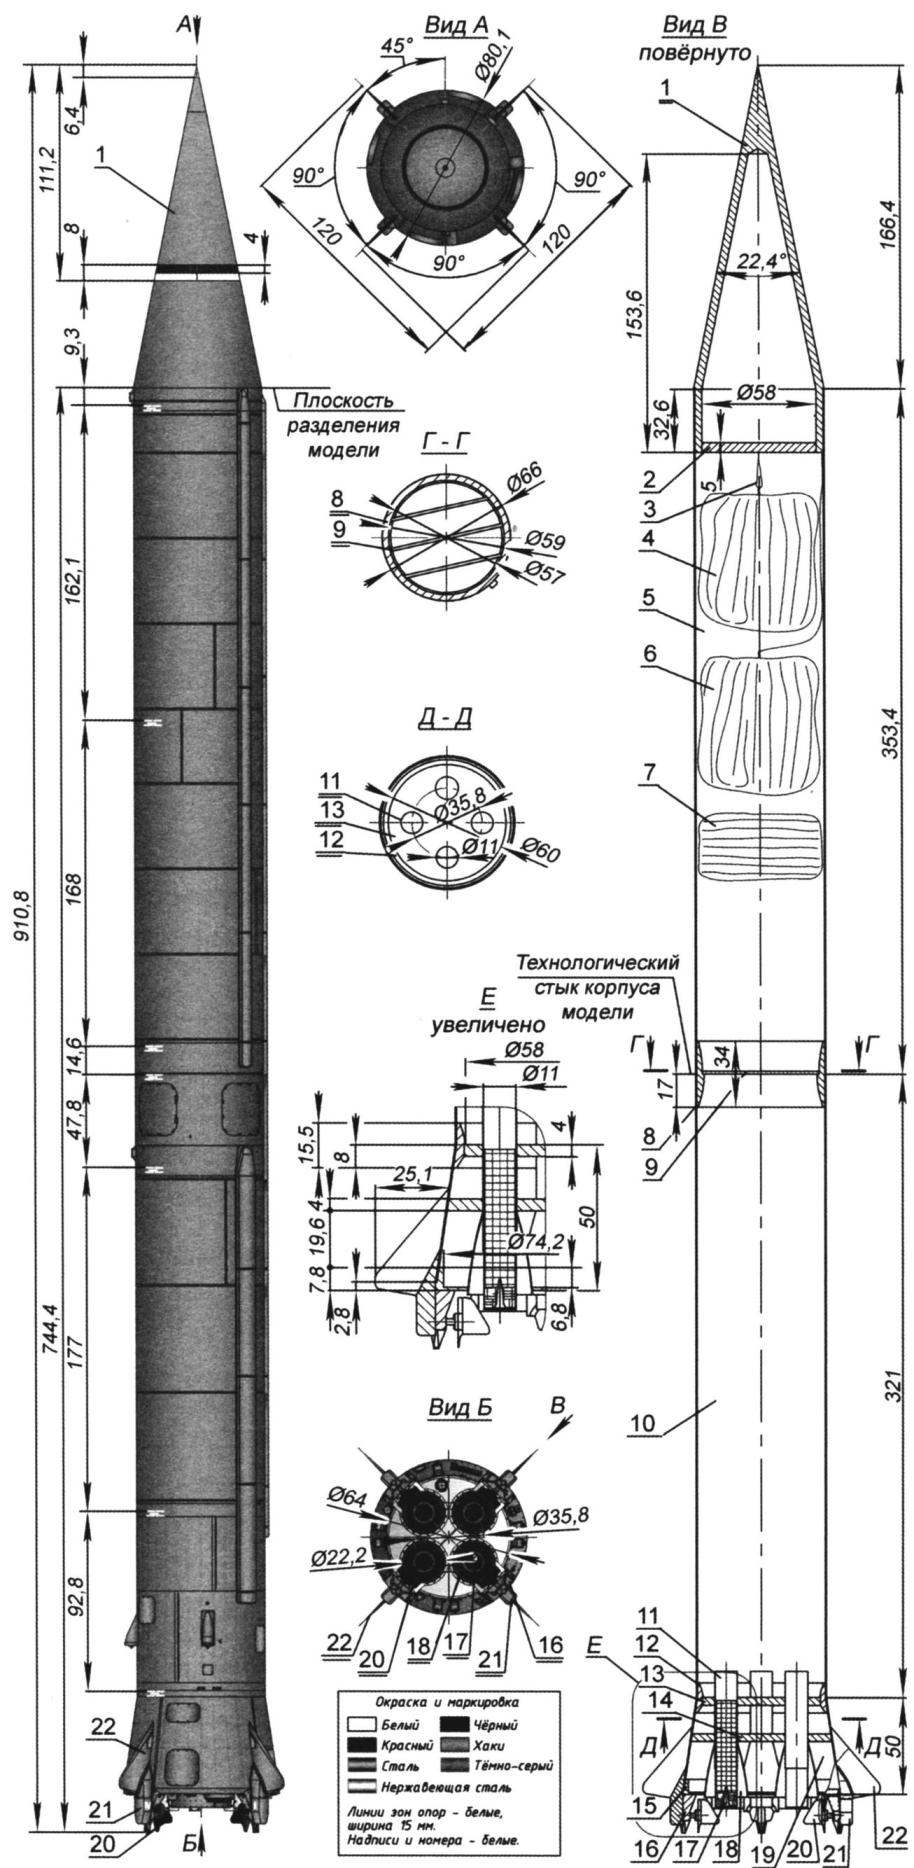 Fig. 2. Model-a copy of the R-12